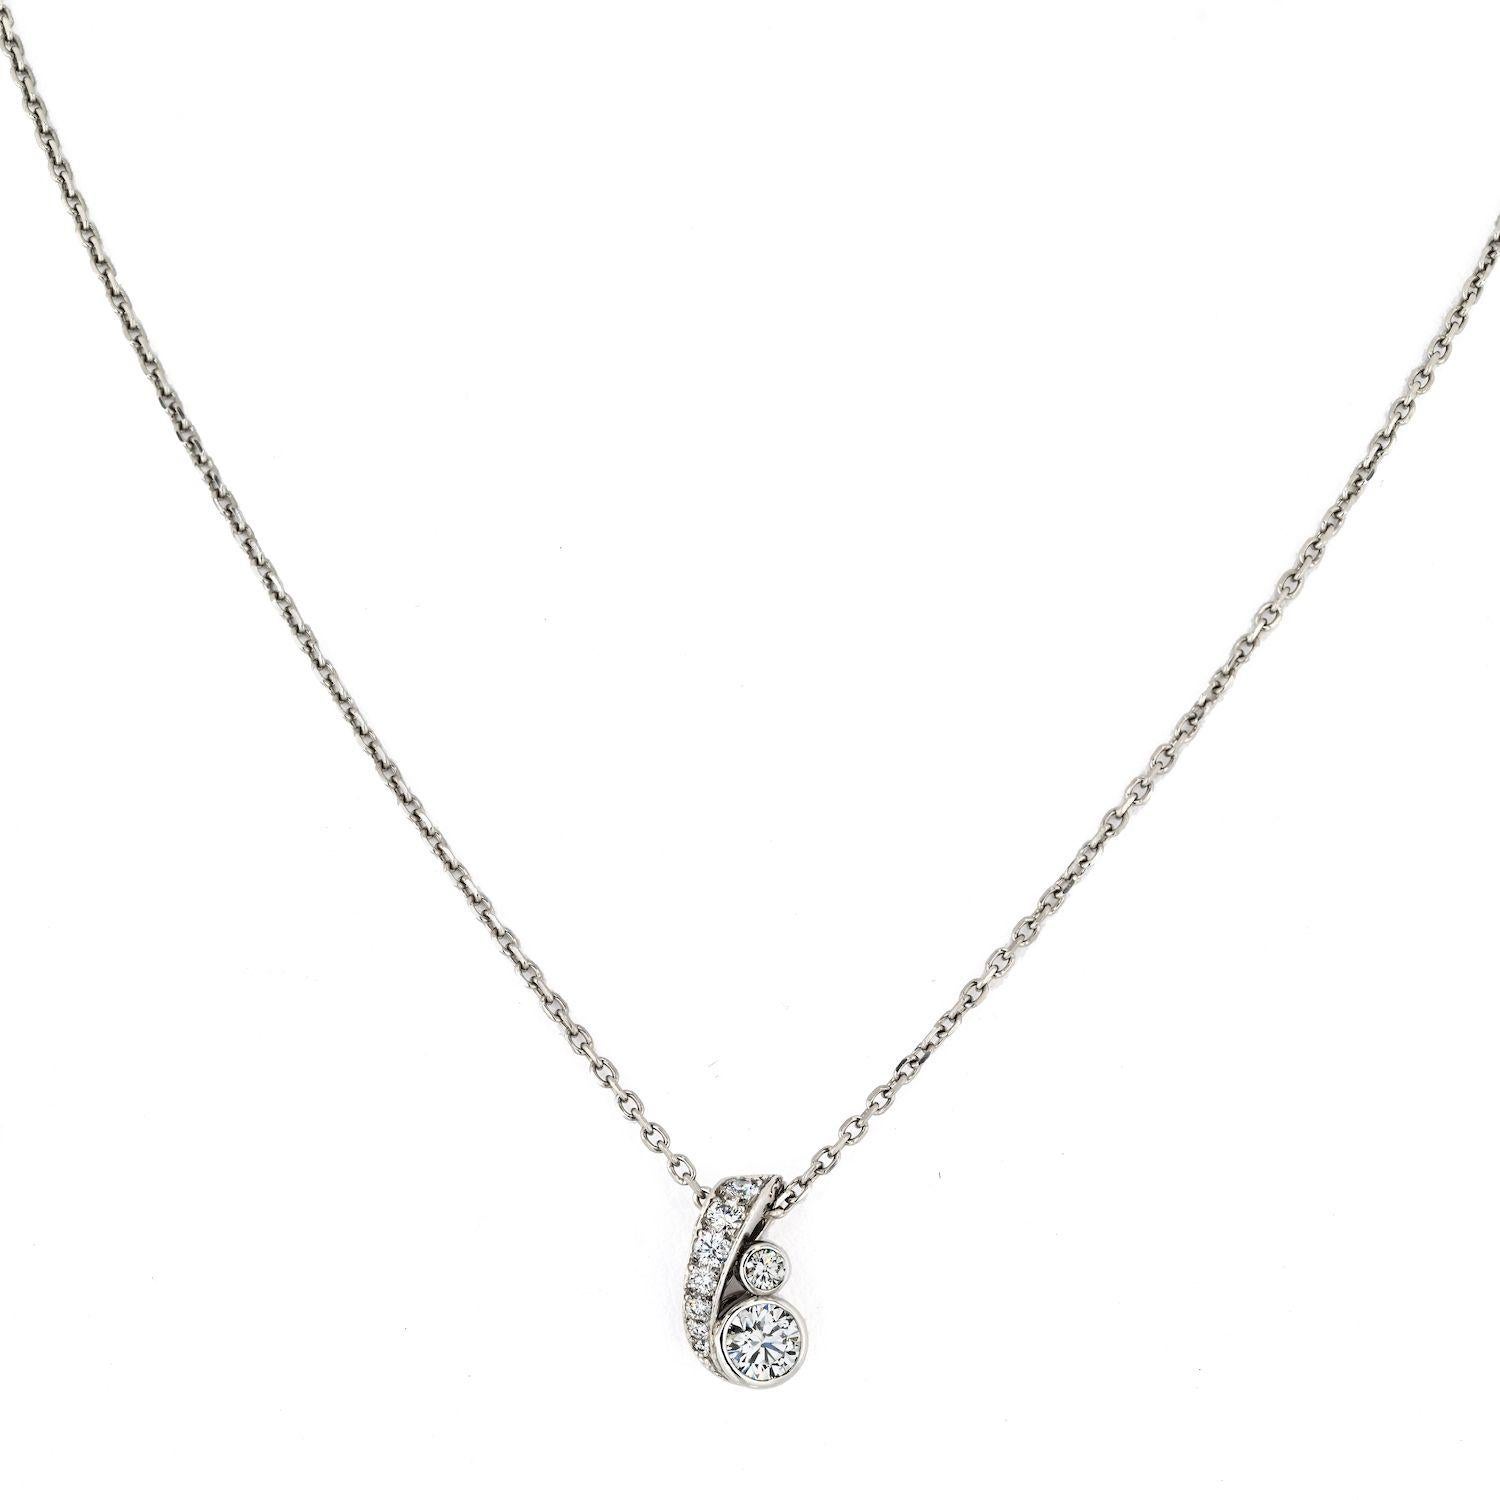 Platinum Cartier solitaire diamond pendant featuring 10 round cut diamonds of 0.80cttw. 
Two center diamonds are bezel set one on top of the other 8 are framing the two on one side. 
16 inches long. 